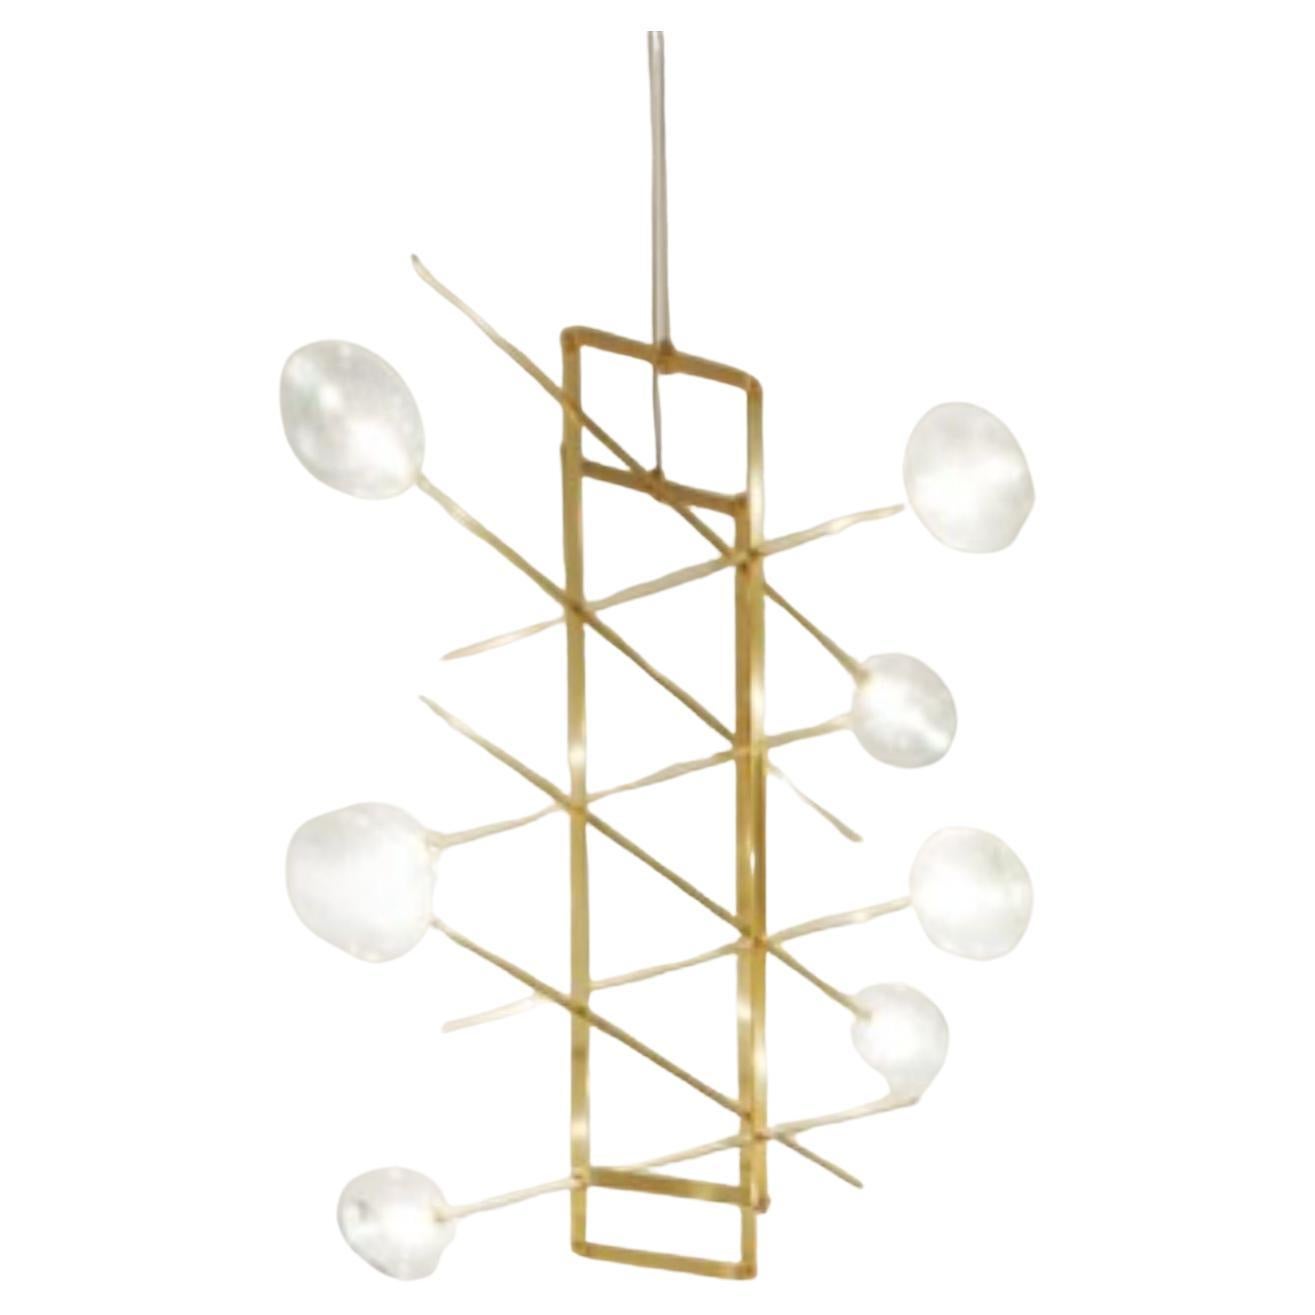 Modular Chandelier Long 8 Lamps by Contain